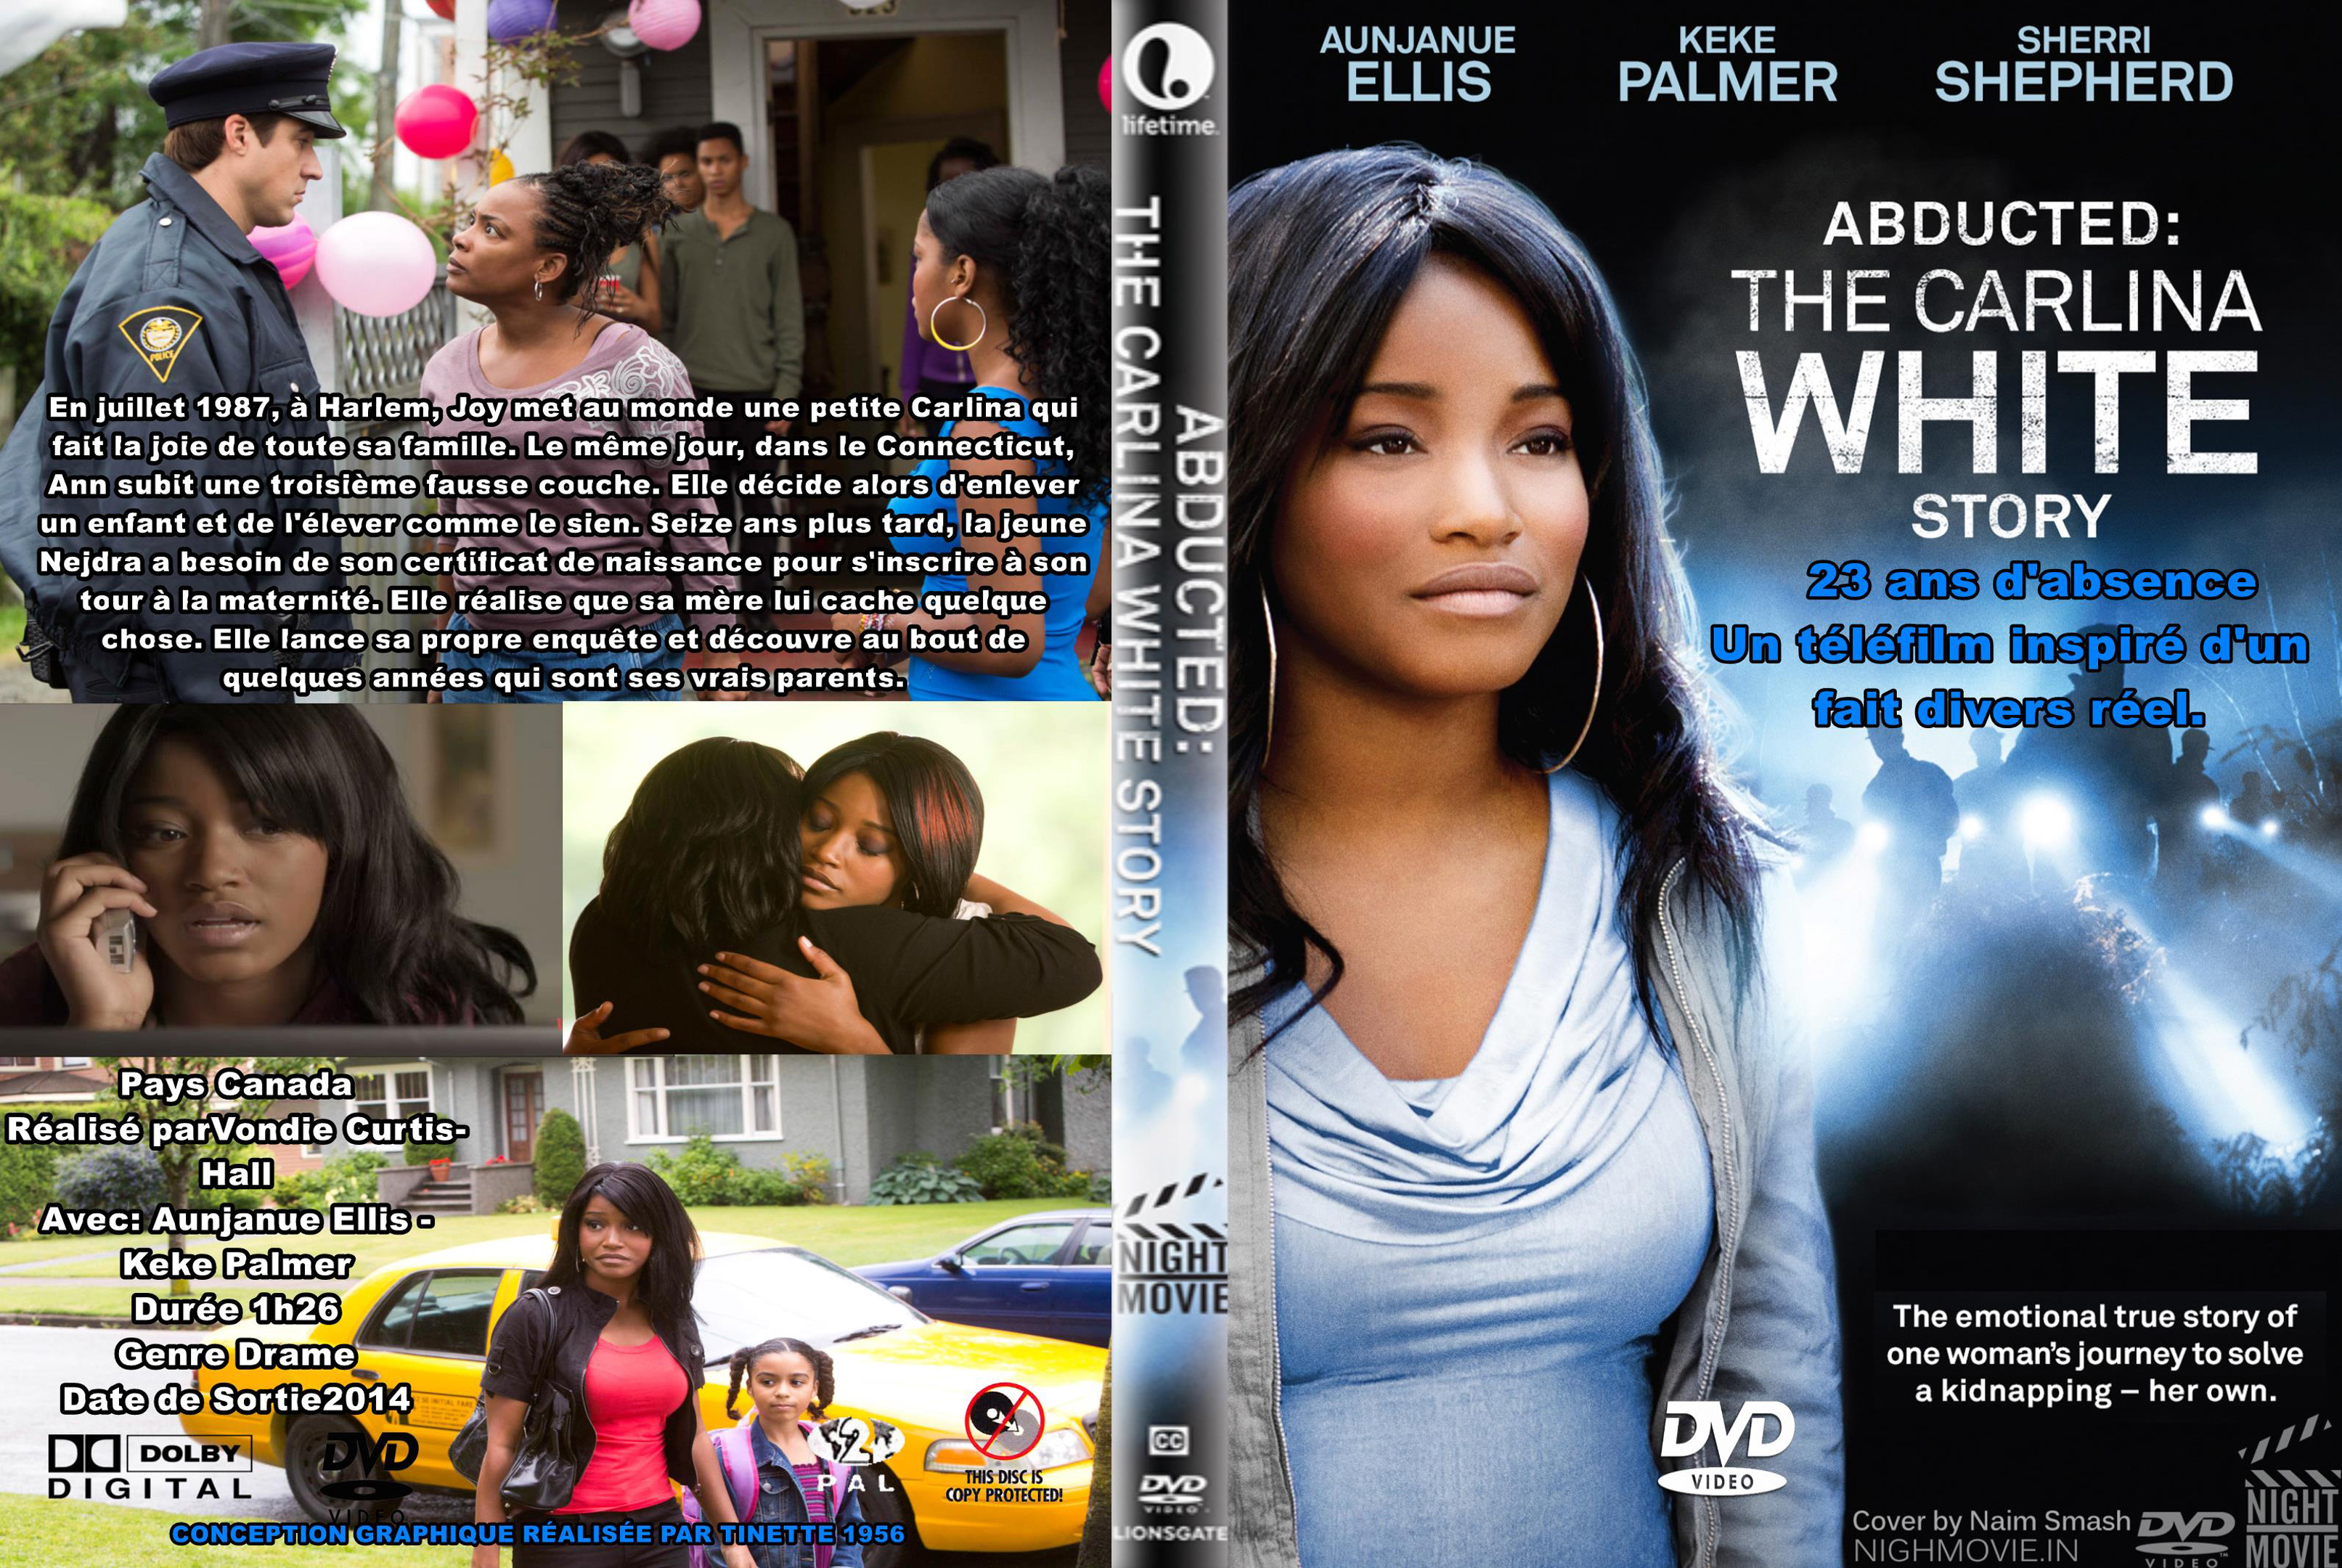 Jaquette DVD Abducted the carlina white story custom